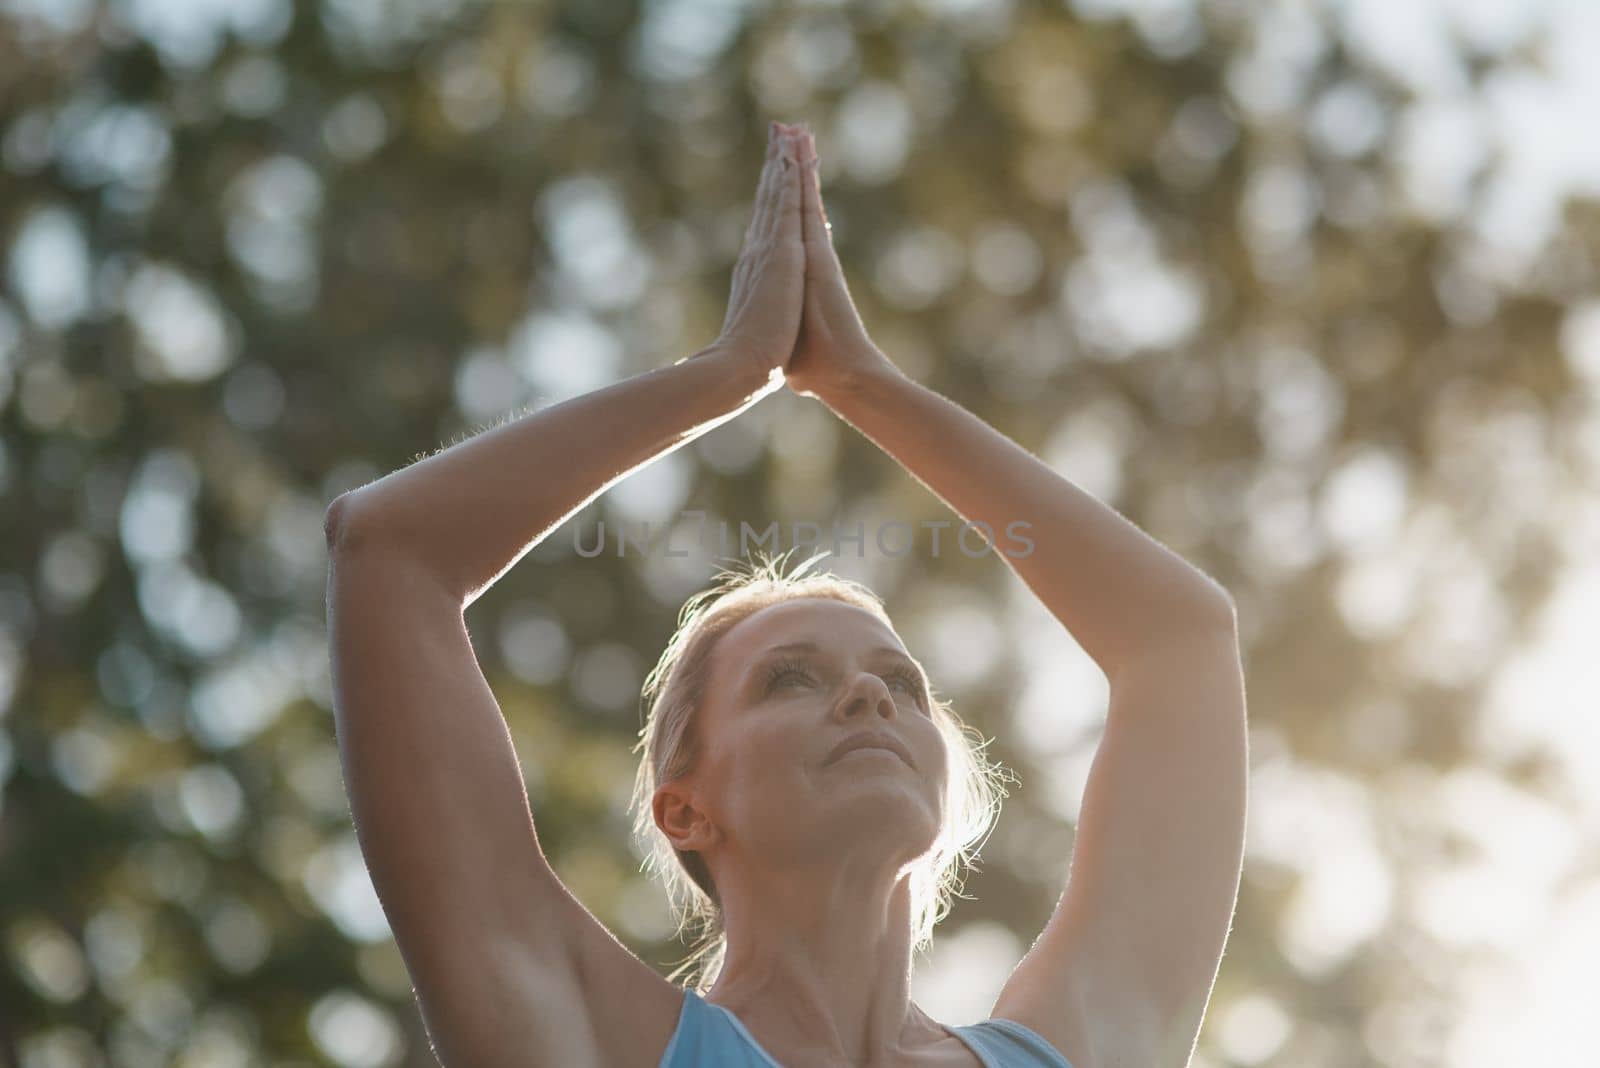 Nature brings peace to all. mature and fit woman engaging in a standing yoga pose with her hands touching above her head